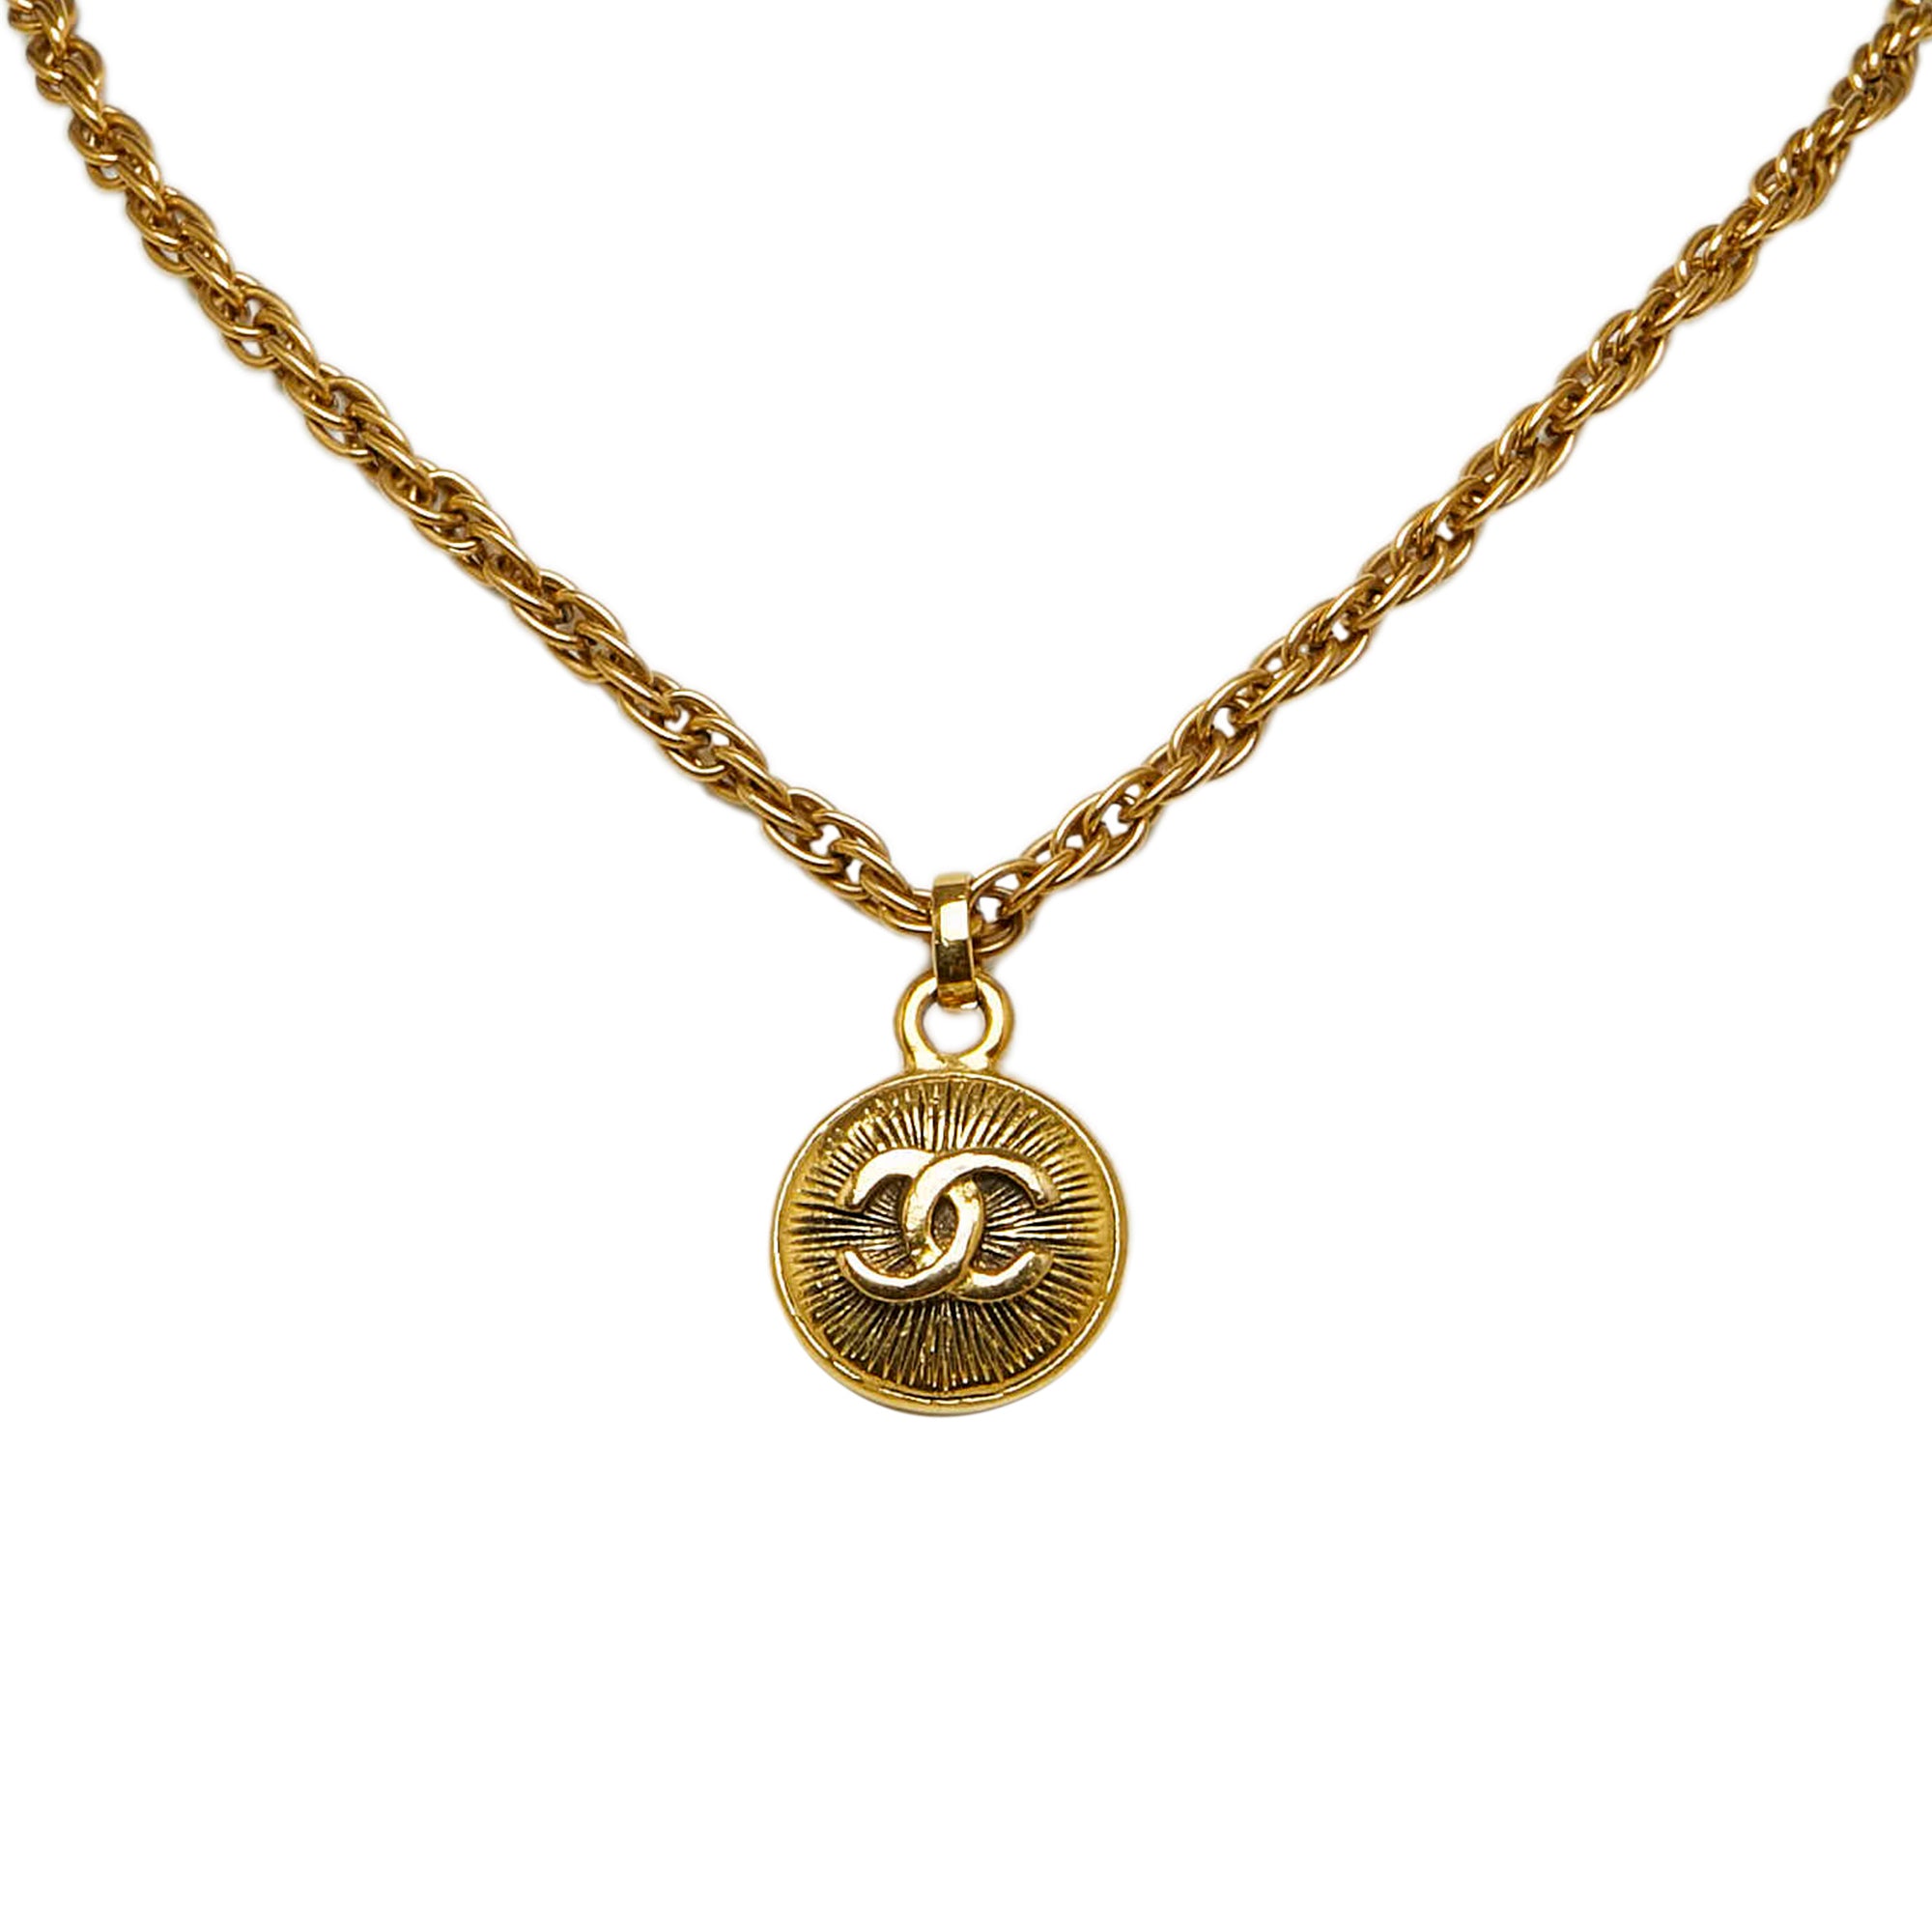 Gold Chanel CC Pendant Necklace, chanel pre owned 1998 jumbo xl denim tote  bag item